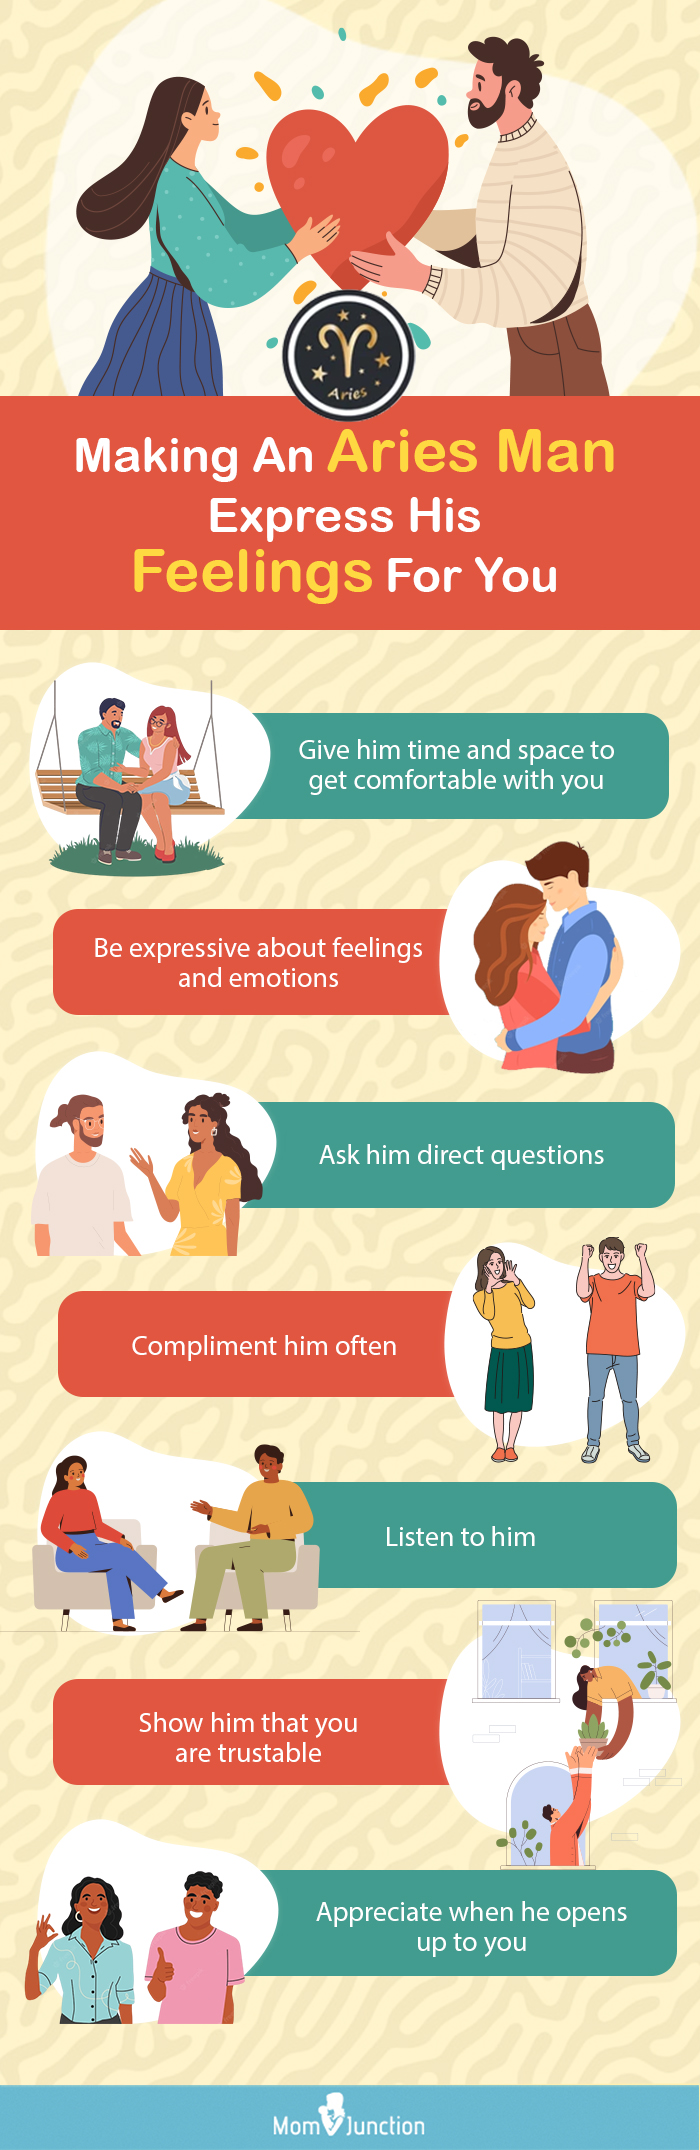 making an aries man express his feelings for you (infographic)